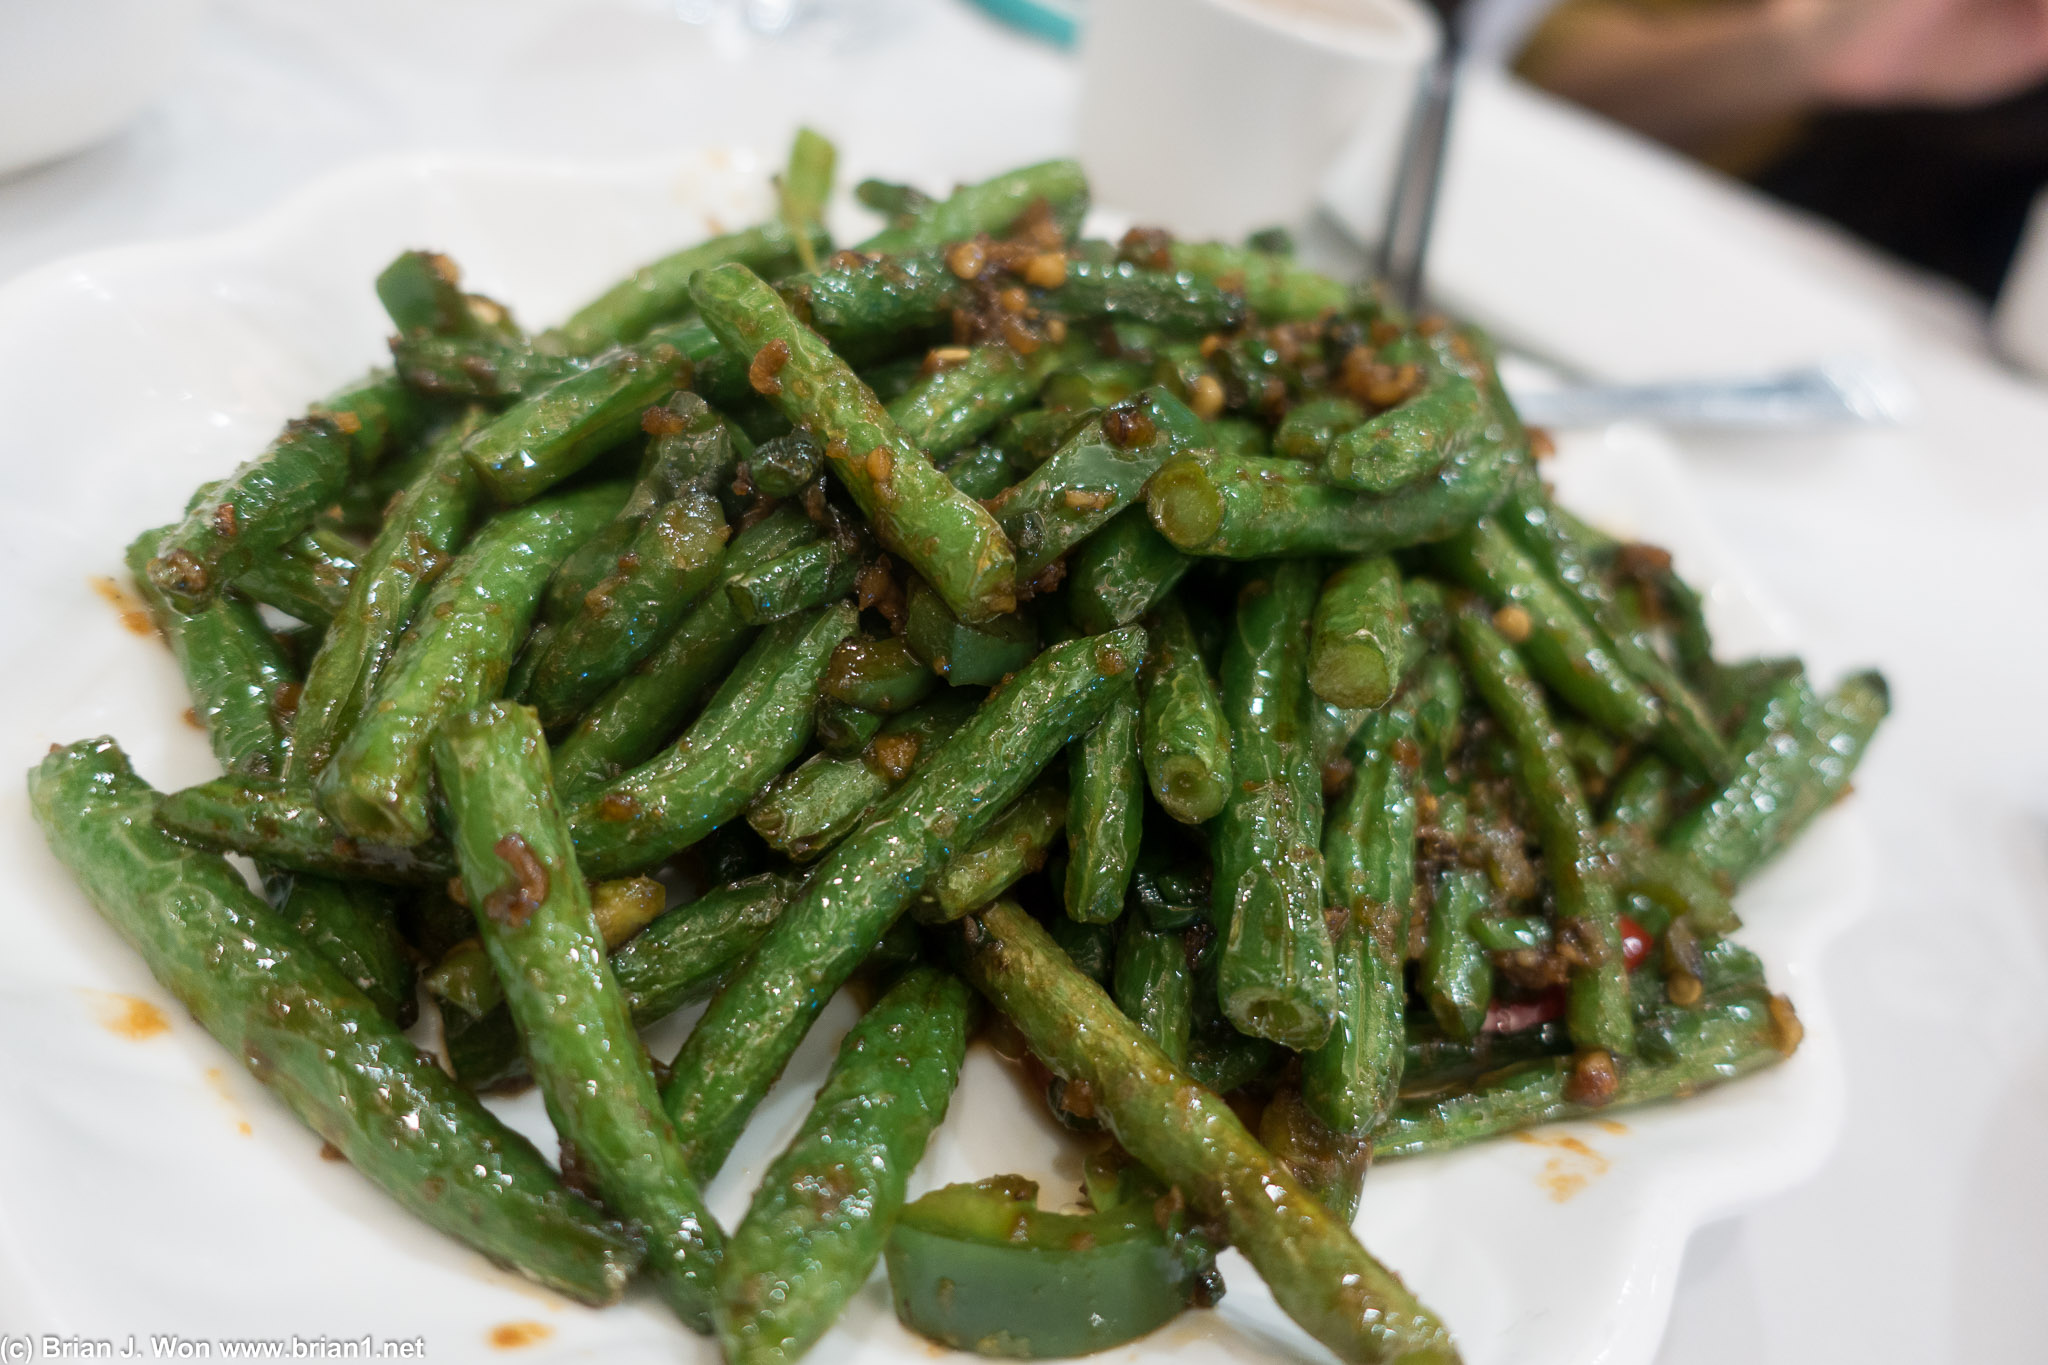 Spicy green beans. Pretty decent, better than the local DTF (but not better than the ones in Arcadia).